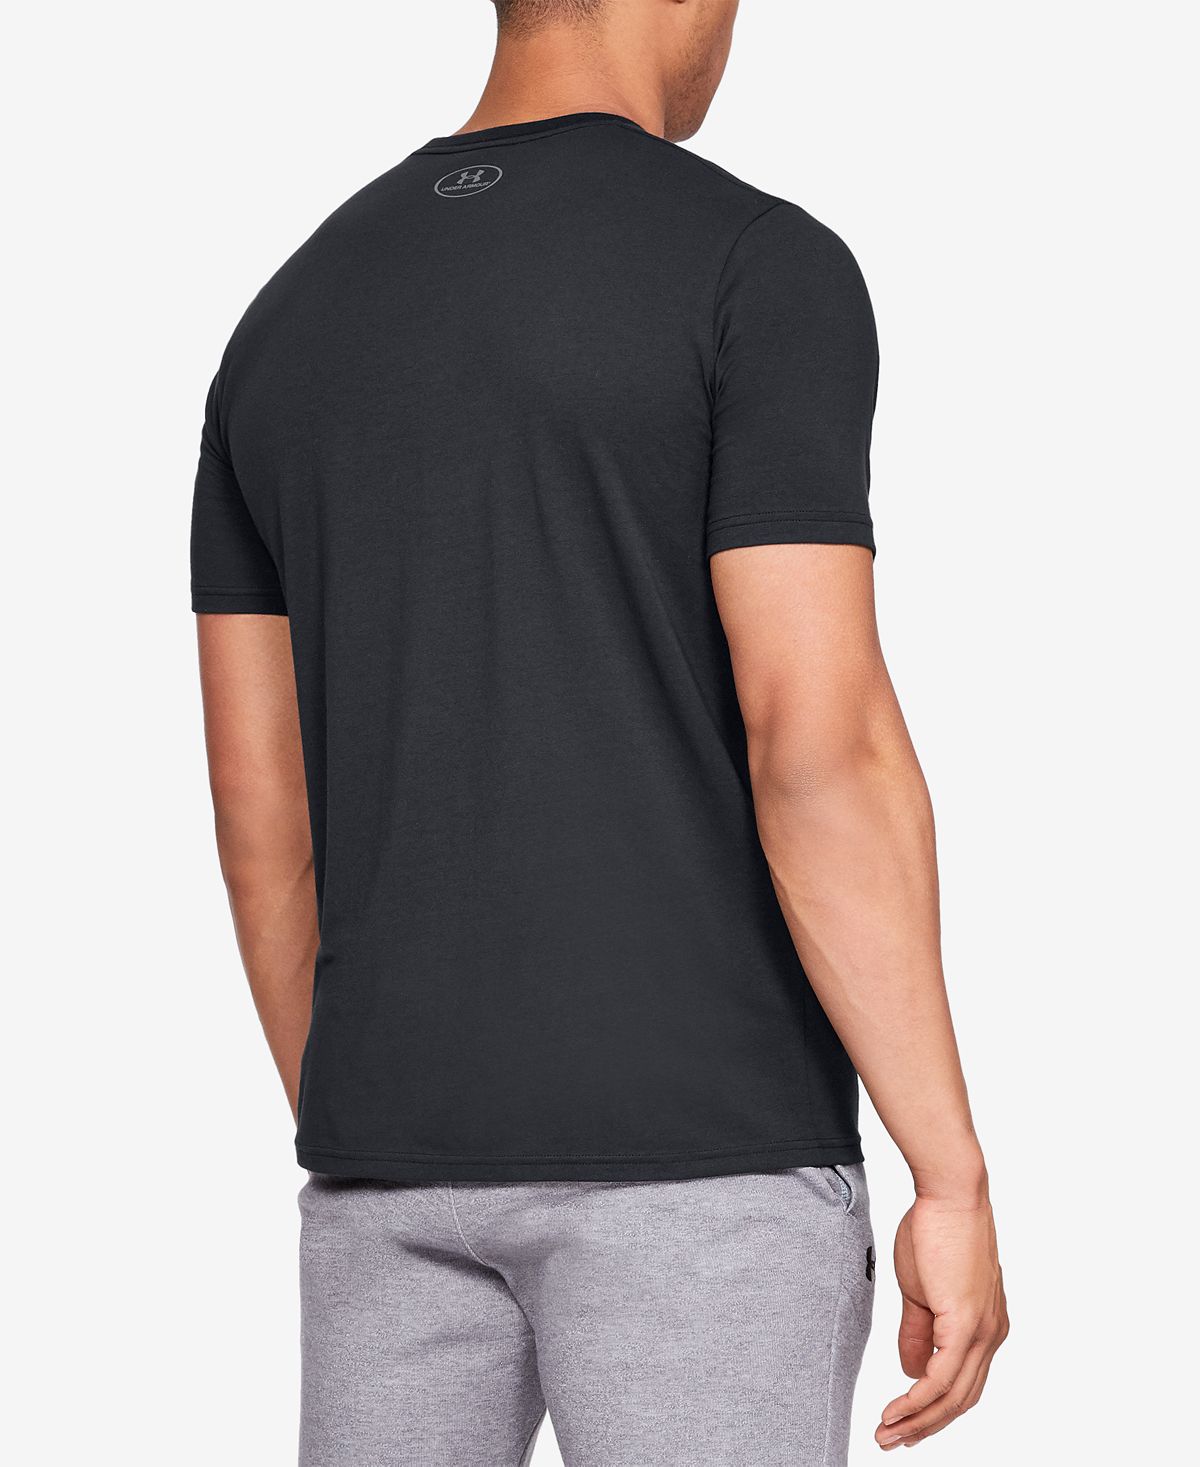 Under Armour Boxed Sportstyle T-shirt Black/Steel